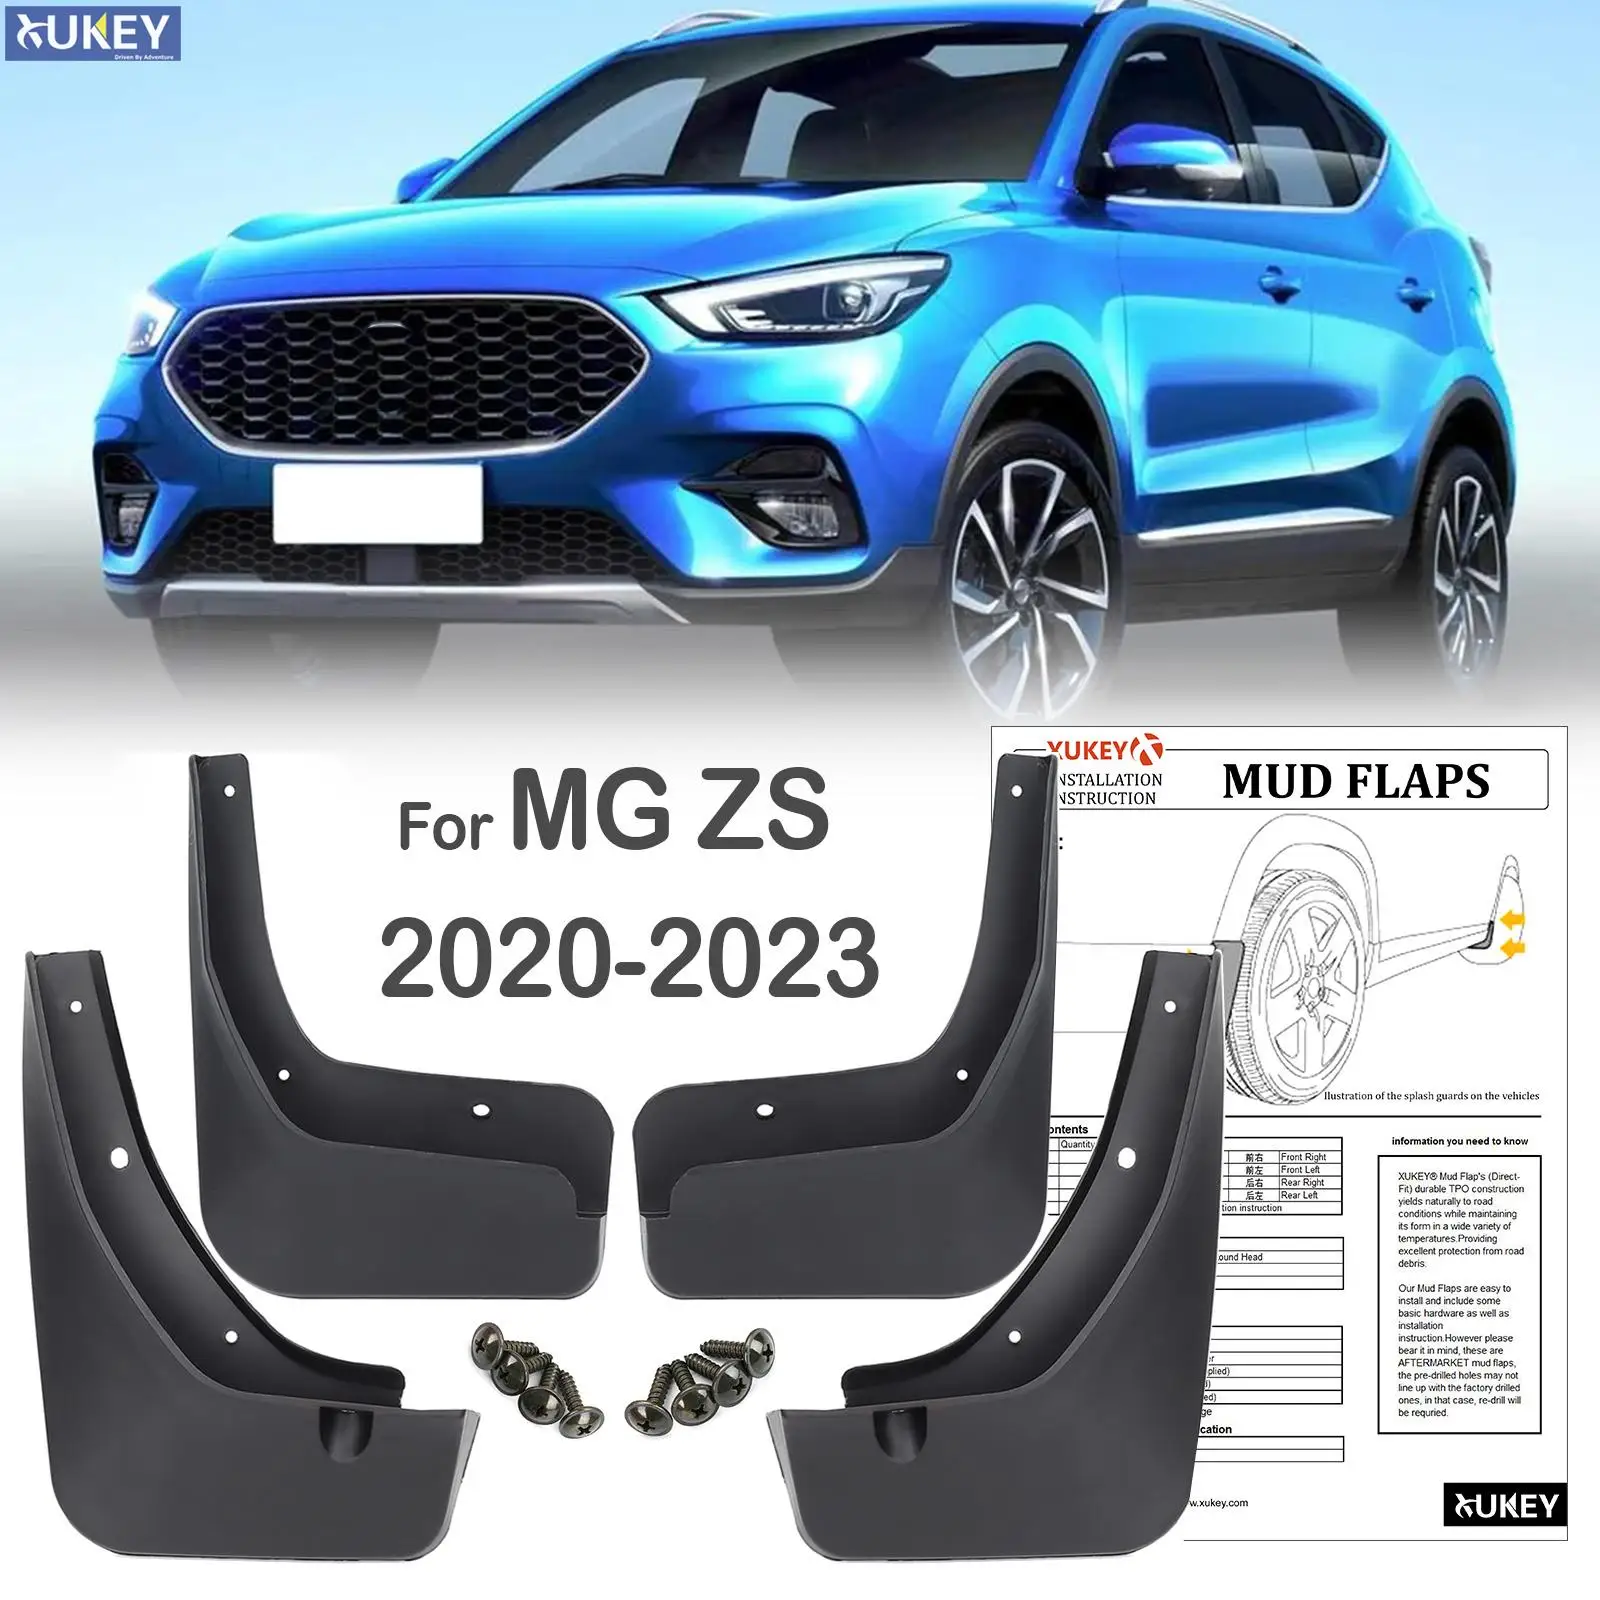 4x For MG ZS EV ZX PLUS ZST VS ZS11 2020 2021 2022 2023 Mud Flaps Splash Guard Mudguards MudFlaps Front Rear Fender Car Styling